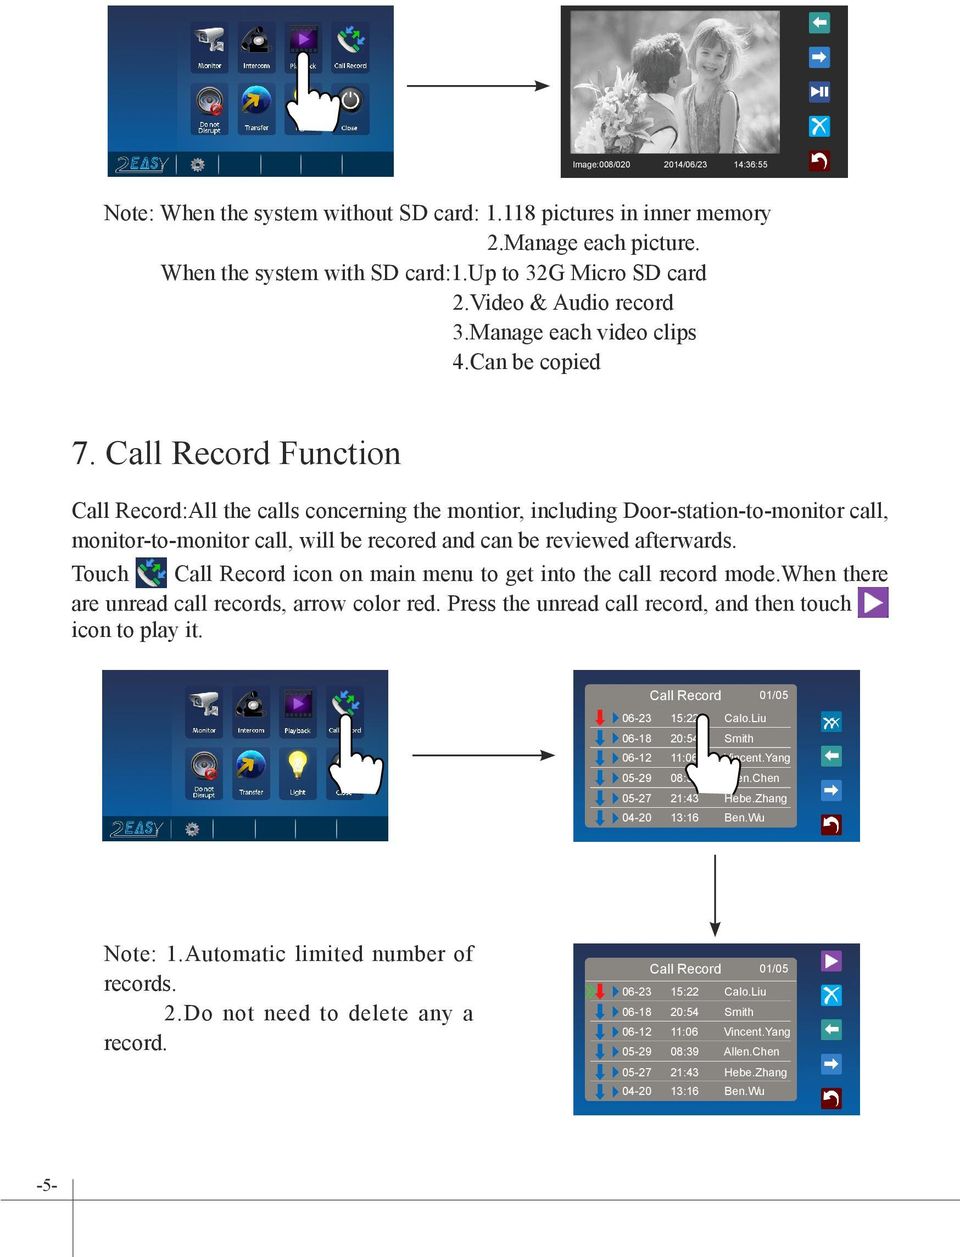 Call Record Function Call Record:All the calls concerning the montior, including Door-station-to-monitor call, monitor-to-monitor call, will be recored and can be reviewed afterwards.